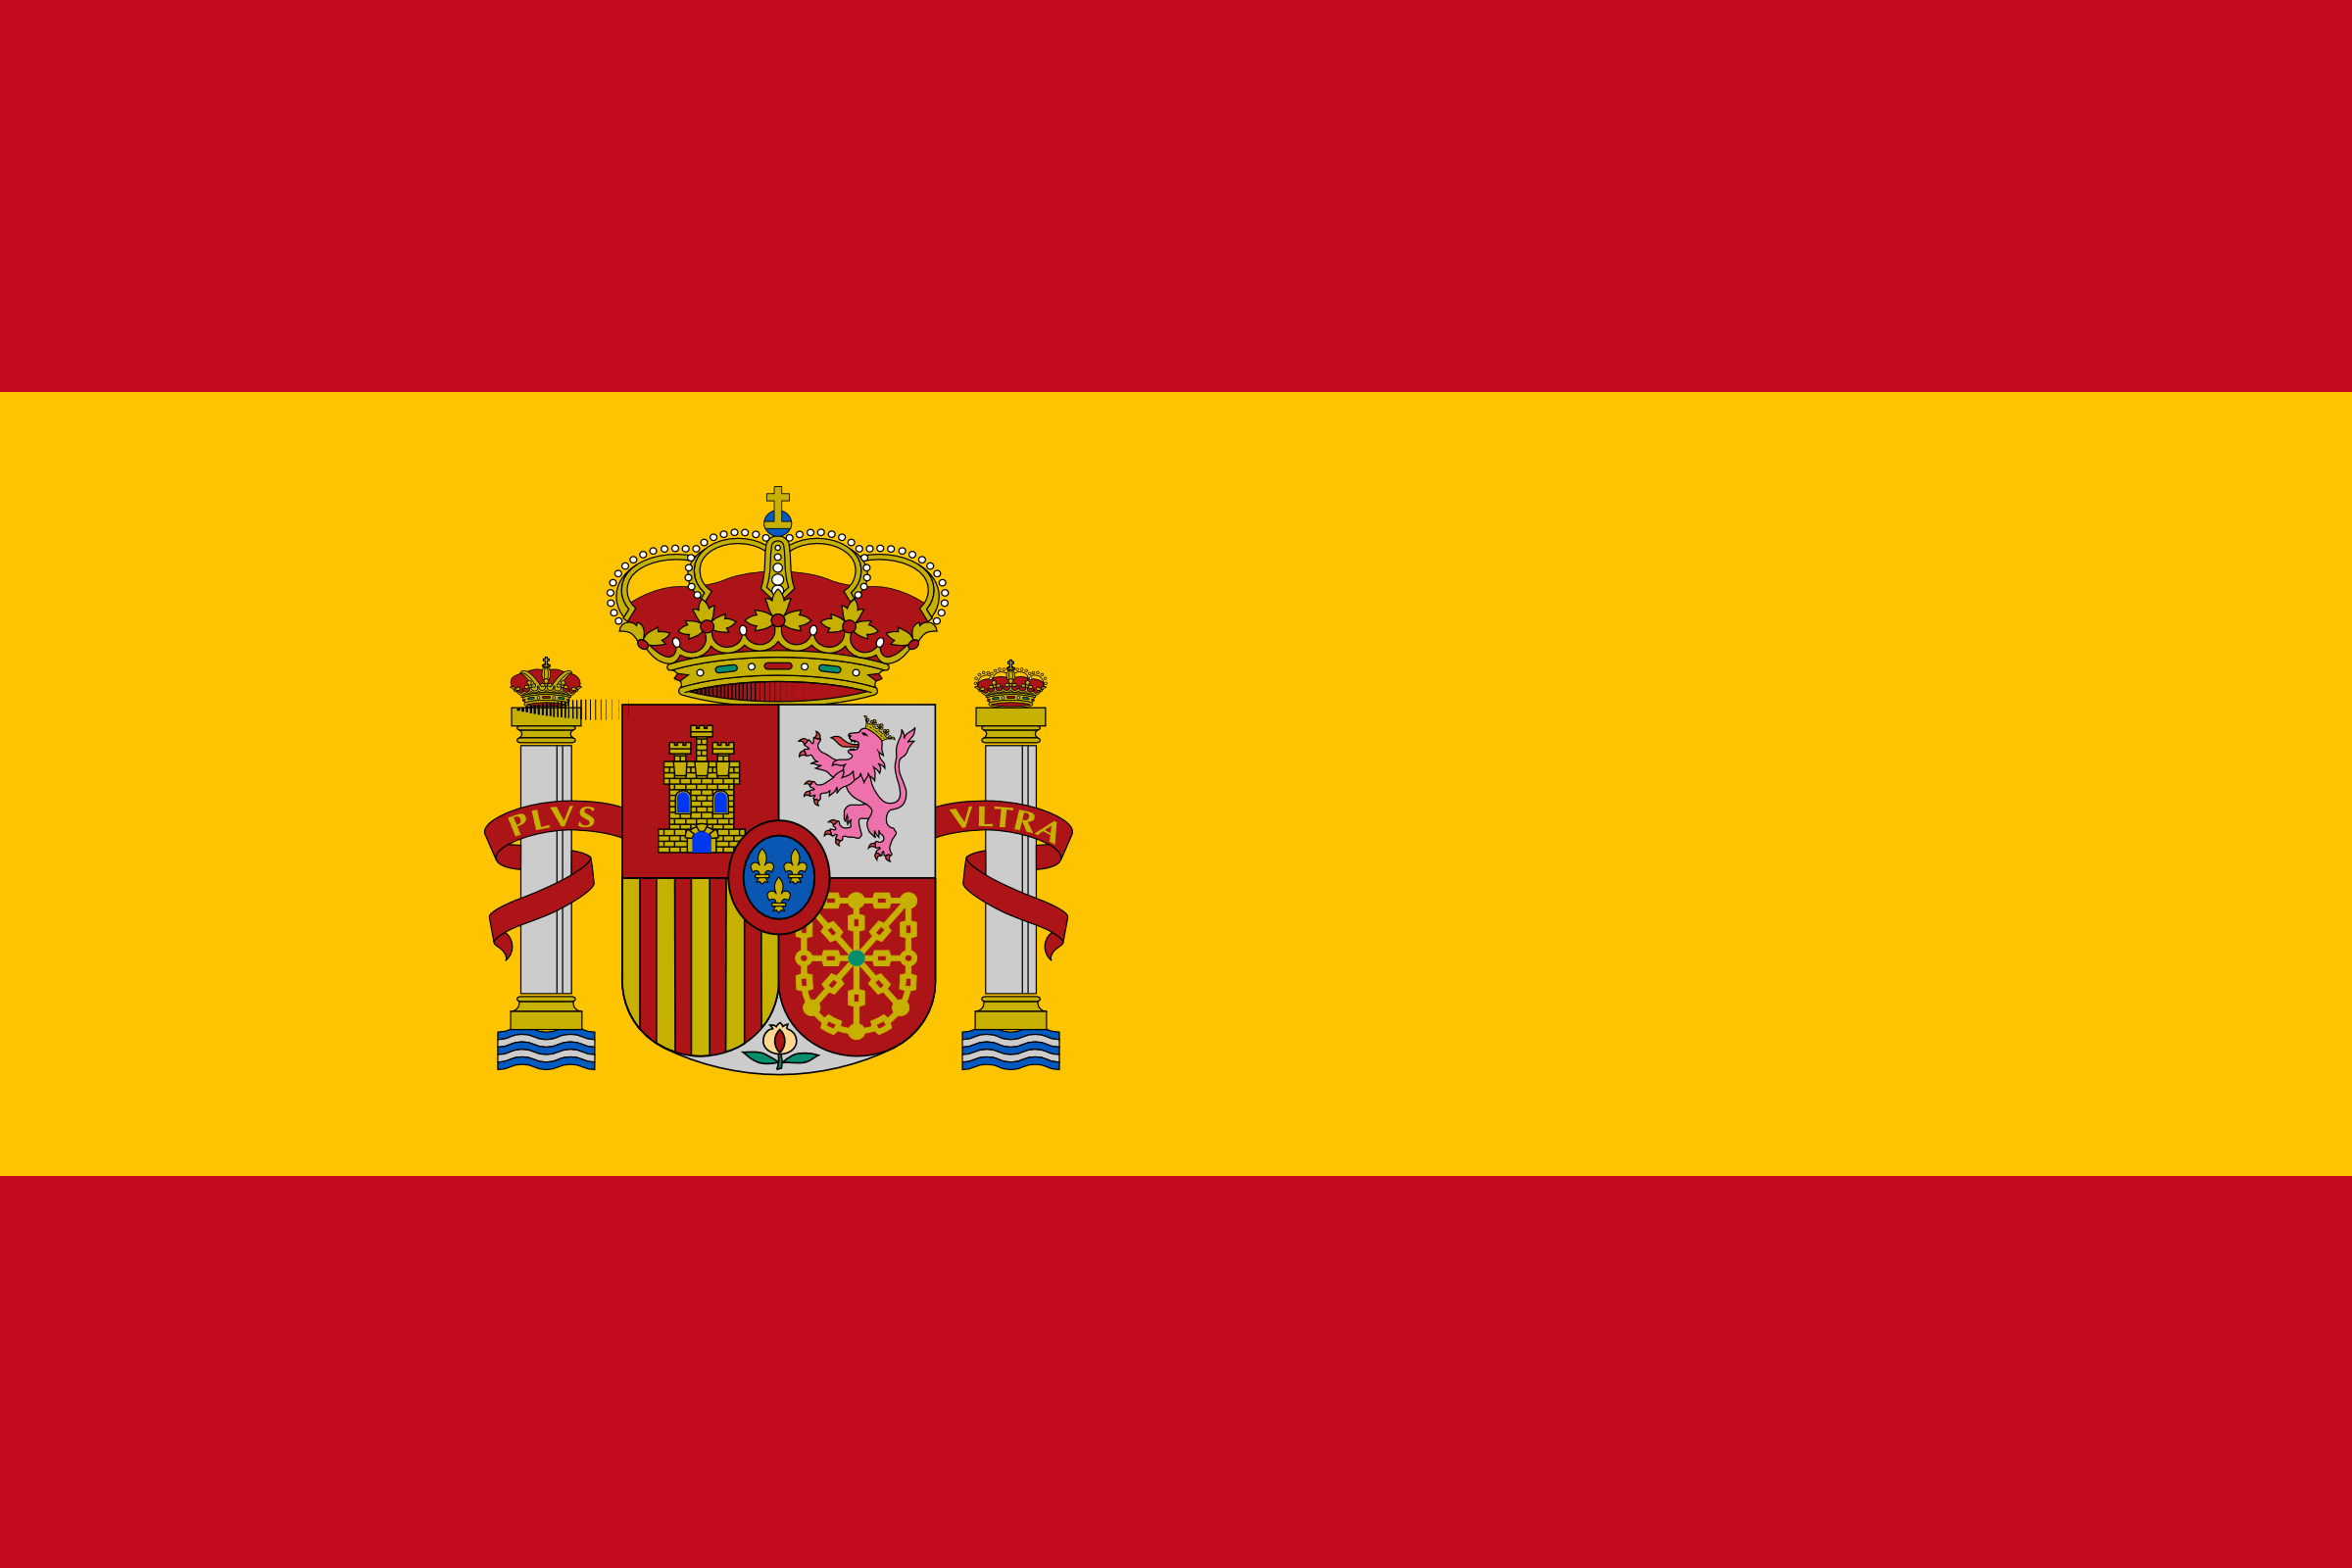 the image shows the spanish flag